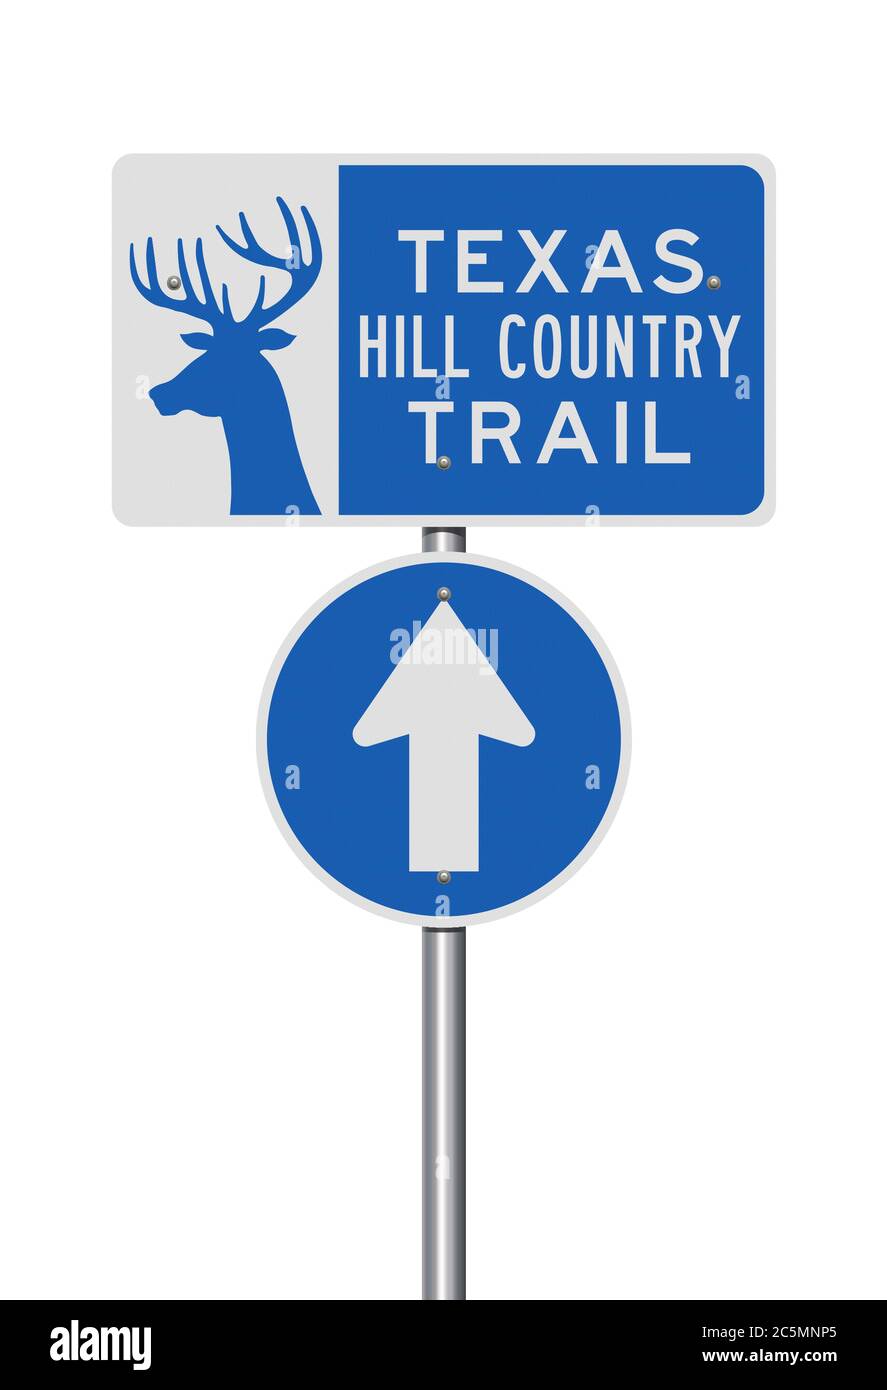 Vector illustration of the Texas Hill Country Trail blue road signs on metallic pole Stock Vector